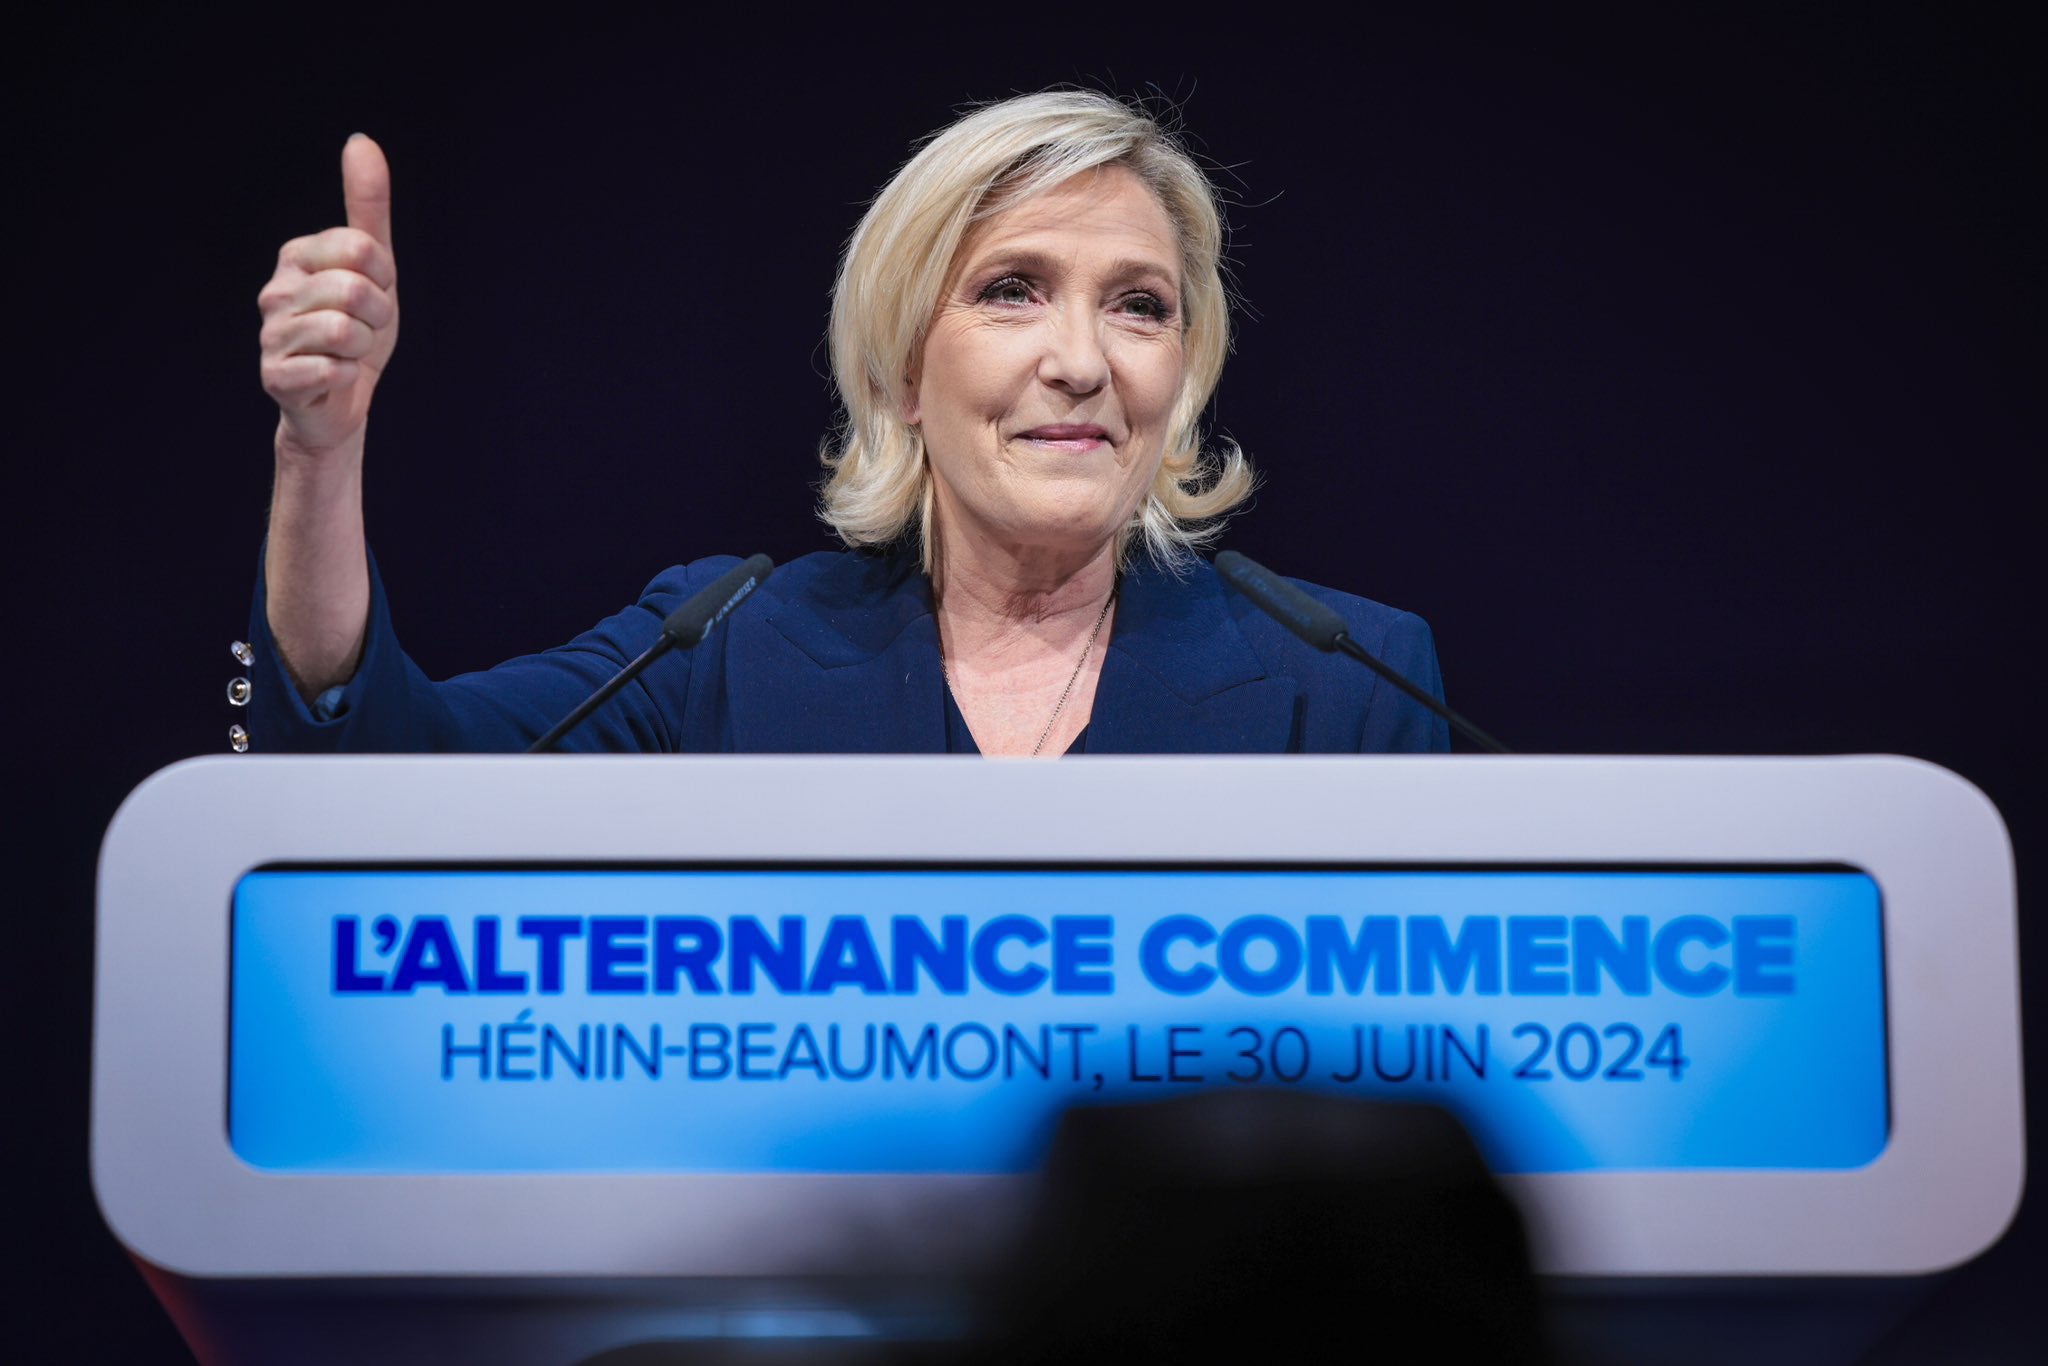 Marine Le Pen’s National Rally – the somewhat sanitised successor to her father’s National Front – came out on top, with around 34 per cent of the overall vote